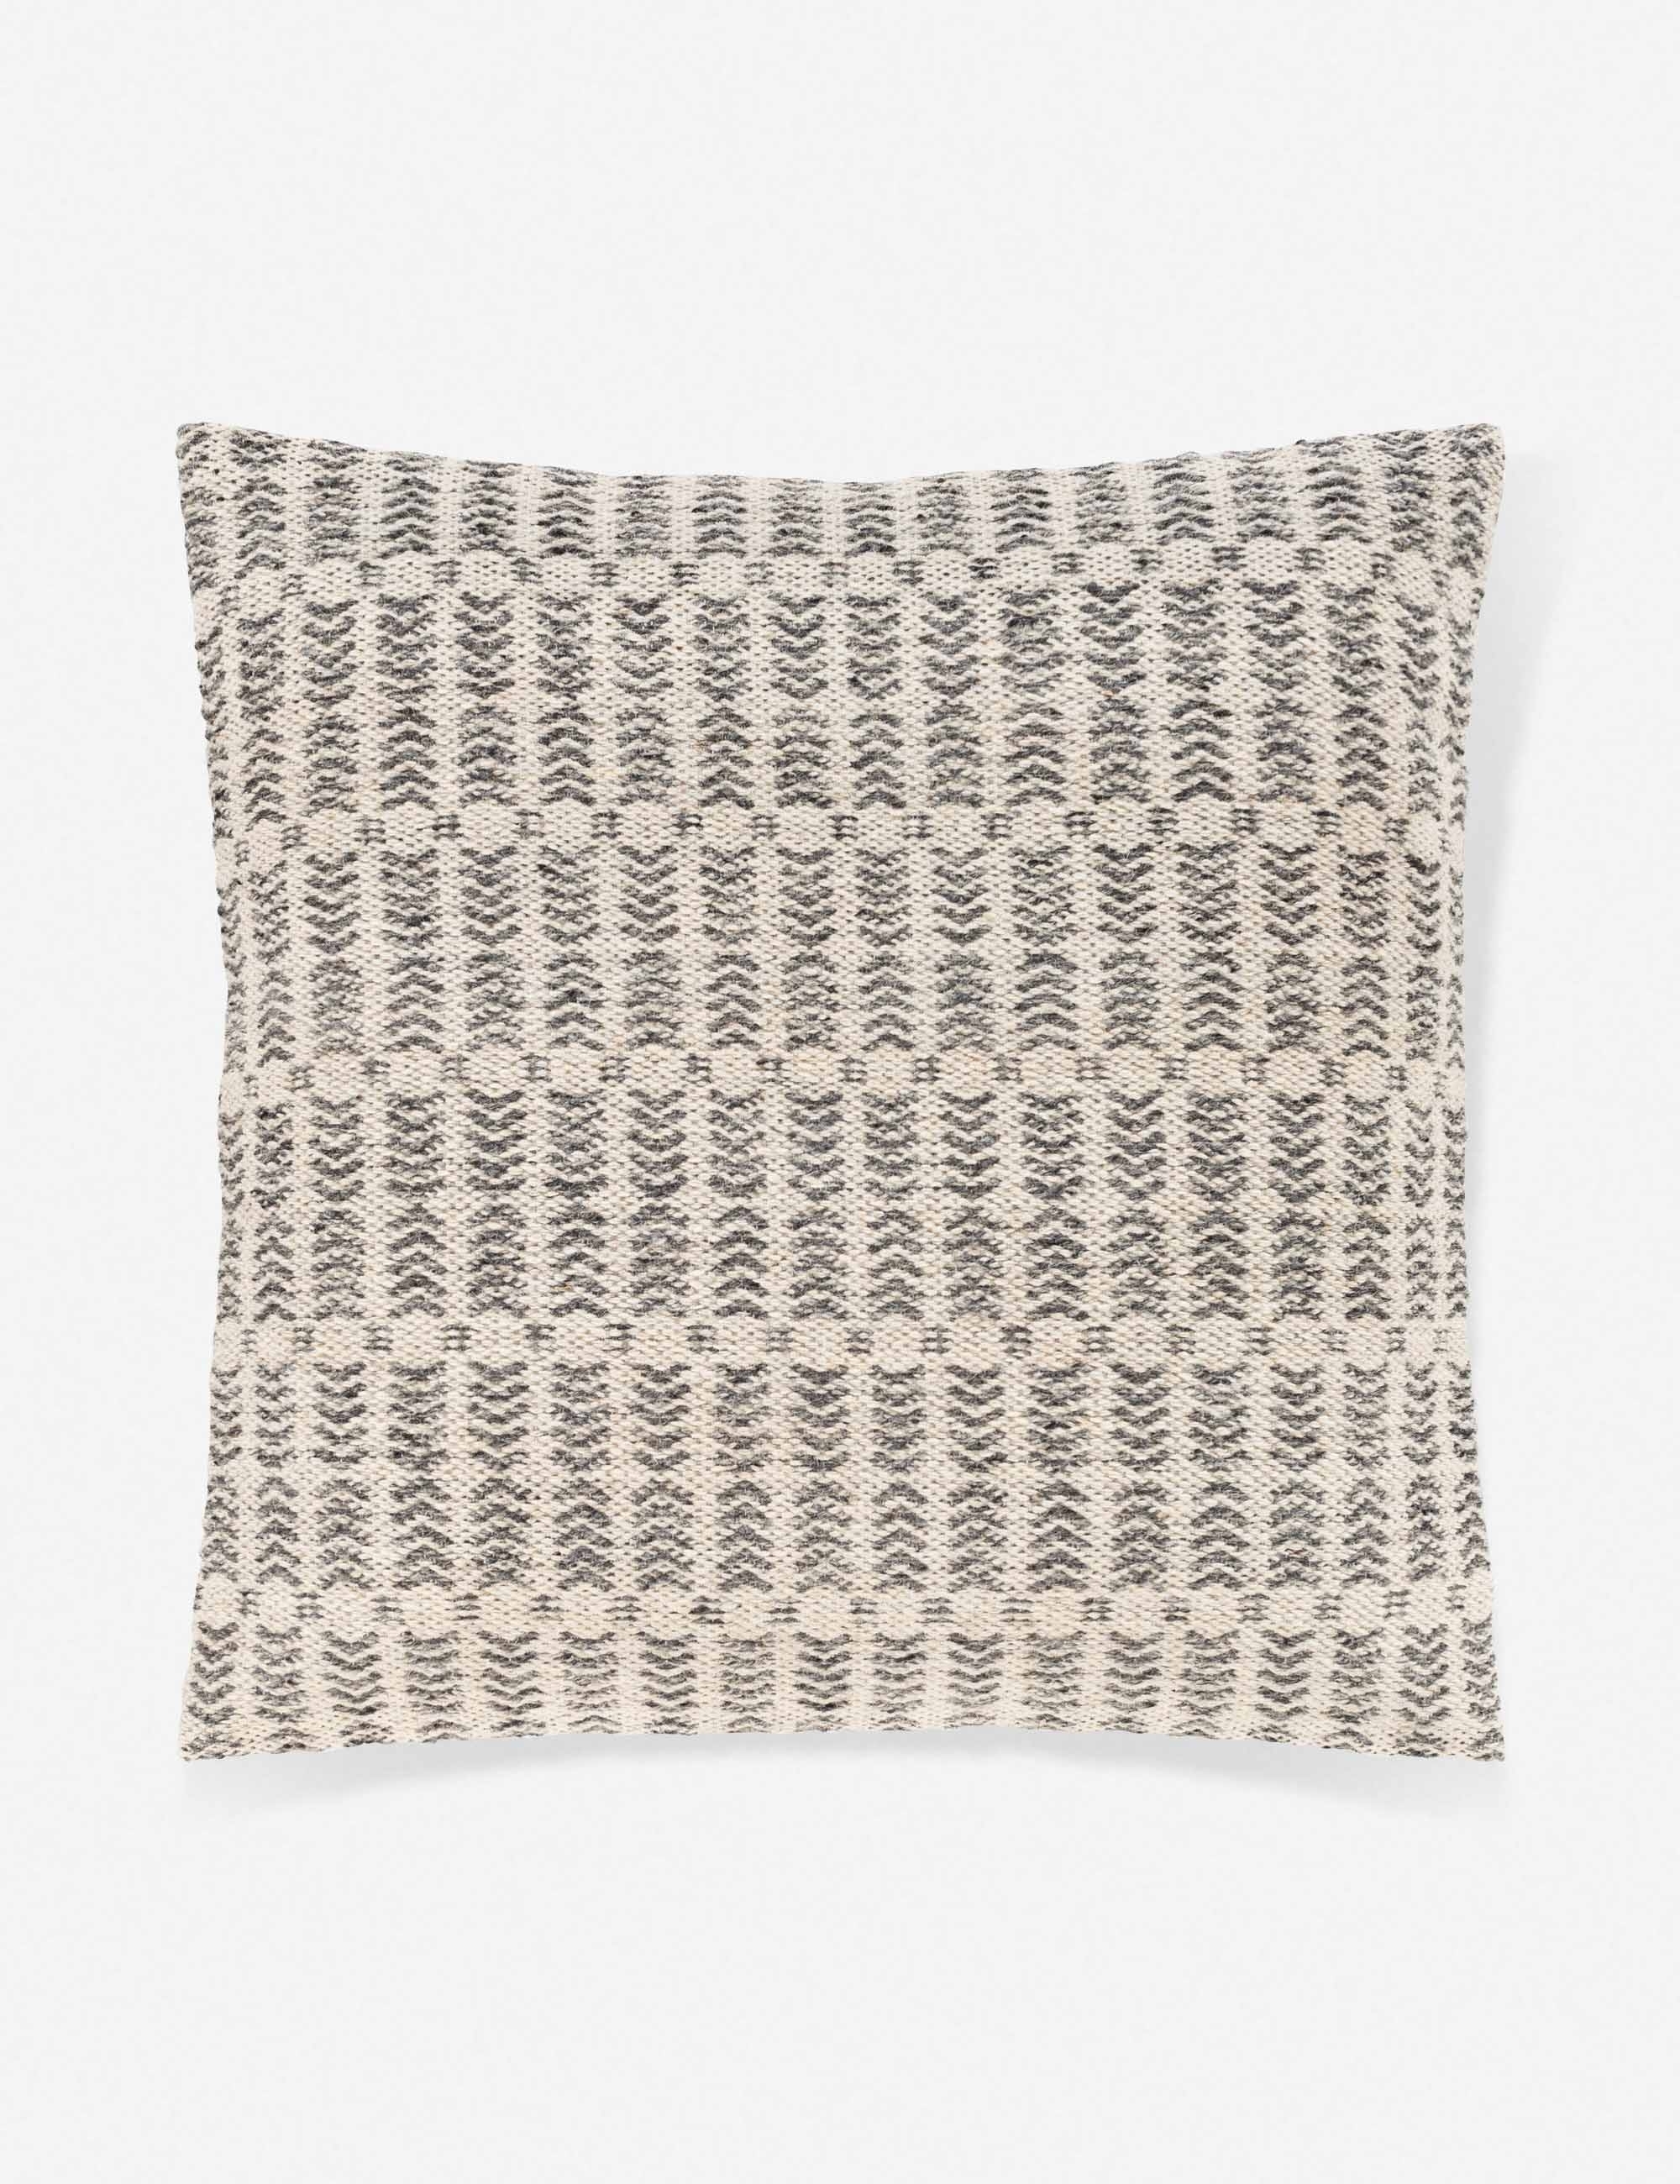 Nysa Pillow, Charcoal & Beige - Image 0